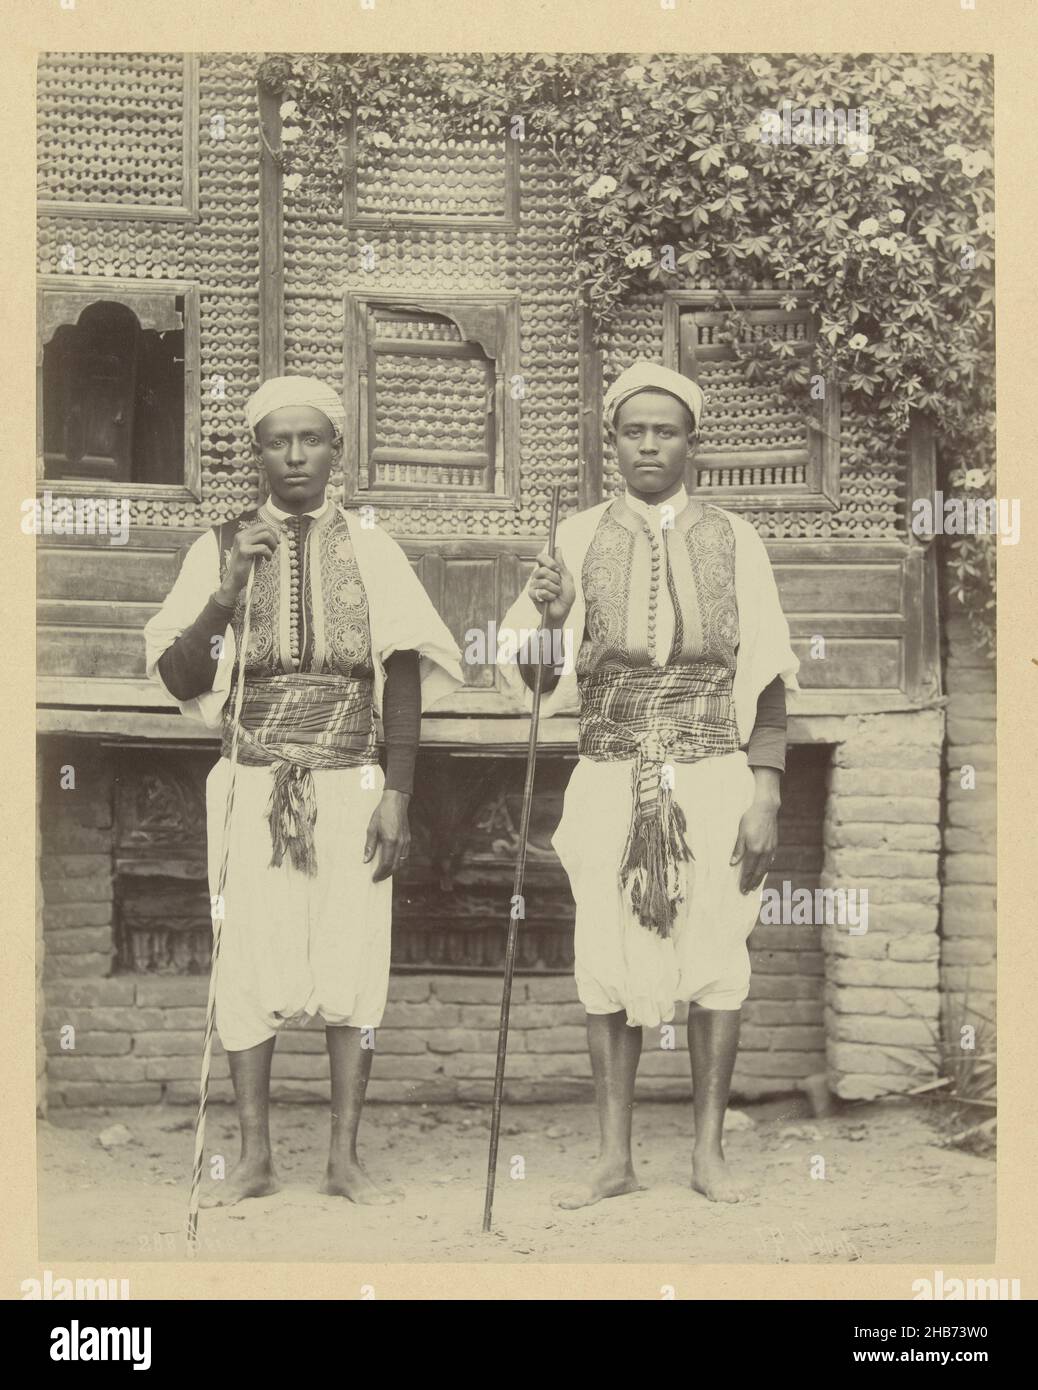 Two guards in uniform, E 19. Saïs (precursors). Cairo. (title on object), Egypt (series title)288 Seis (title on object), The photograph is part of the series of photographs from Egypt collected by Richard Polak., Pascal Sébah (mentioned on object), Egypte, c. 1888 - c. 1898, photographic support, paper, albumen print, height 267 mm × width 205 mmheight 468 mm × width 556 mm Stock Photo